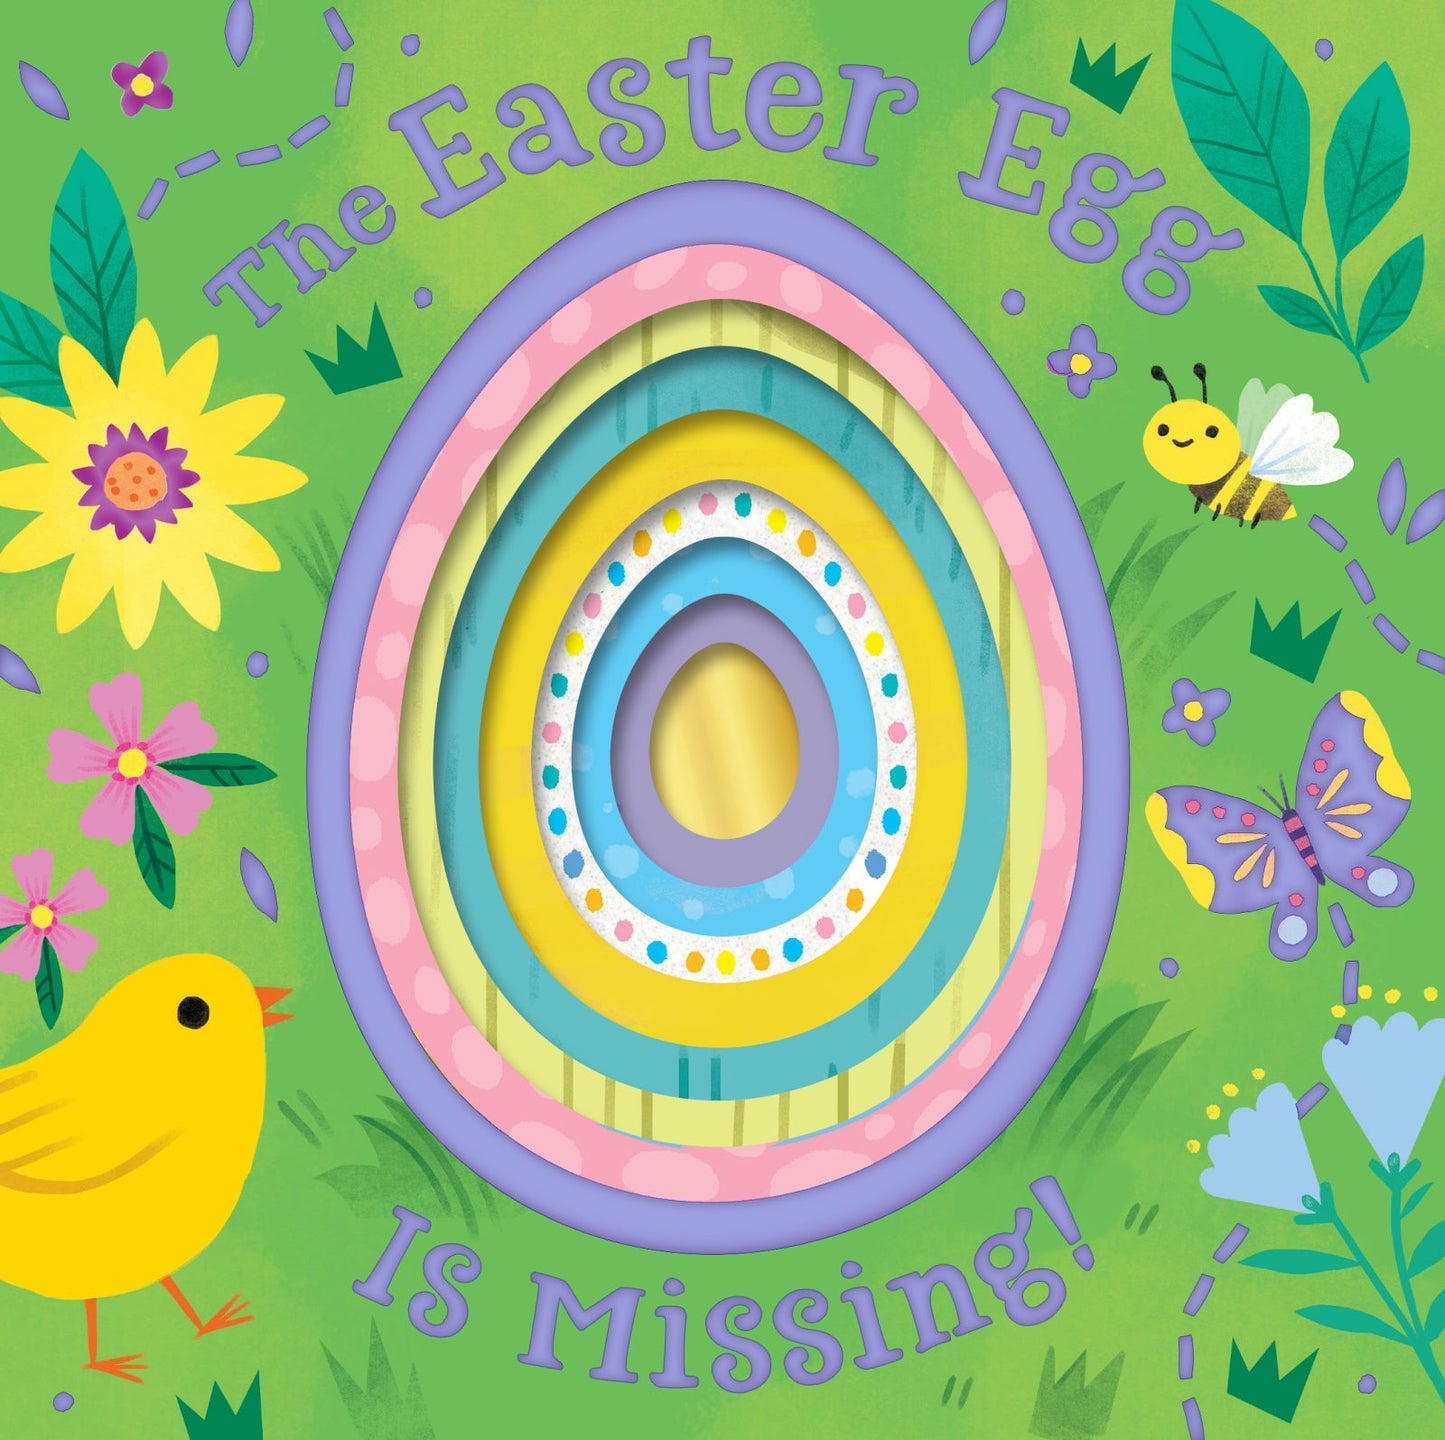 front cover of book with a multi colored egg in the grass surrounded by flowers, butterflies, bee, chick, title